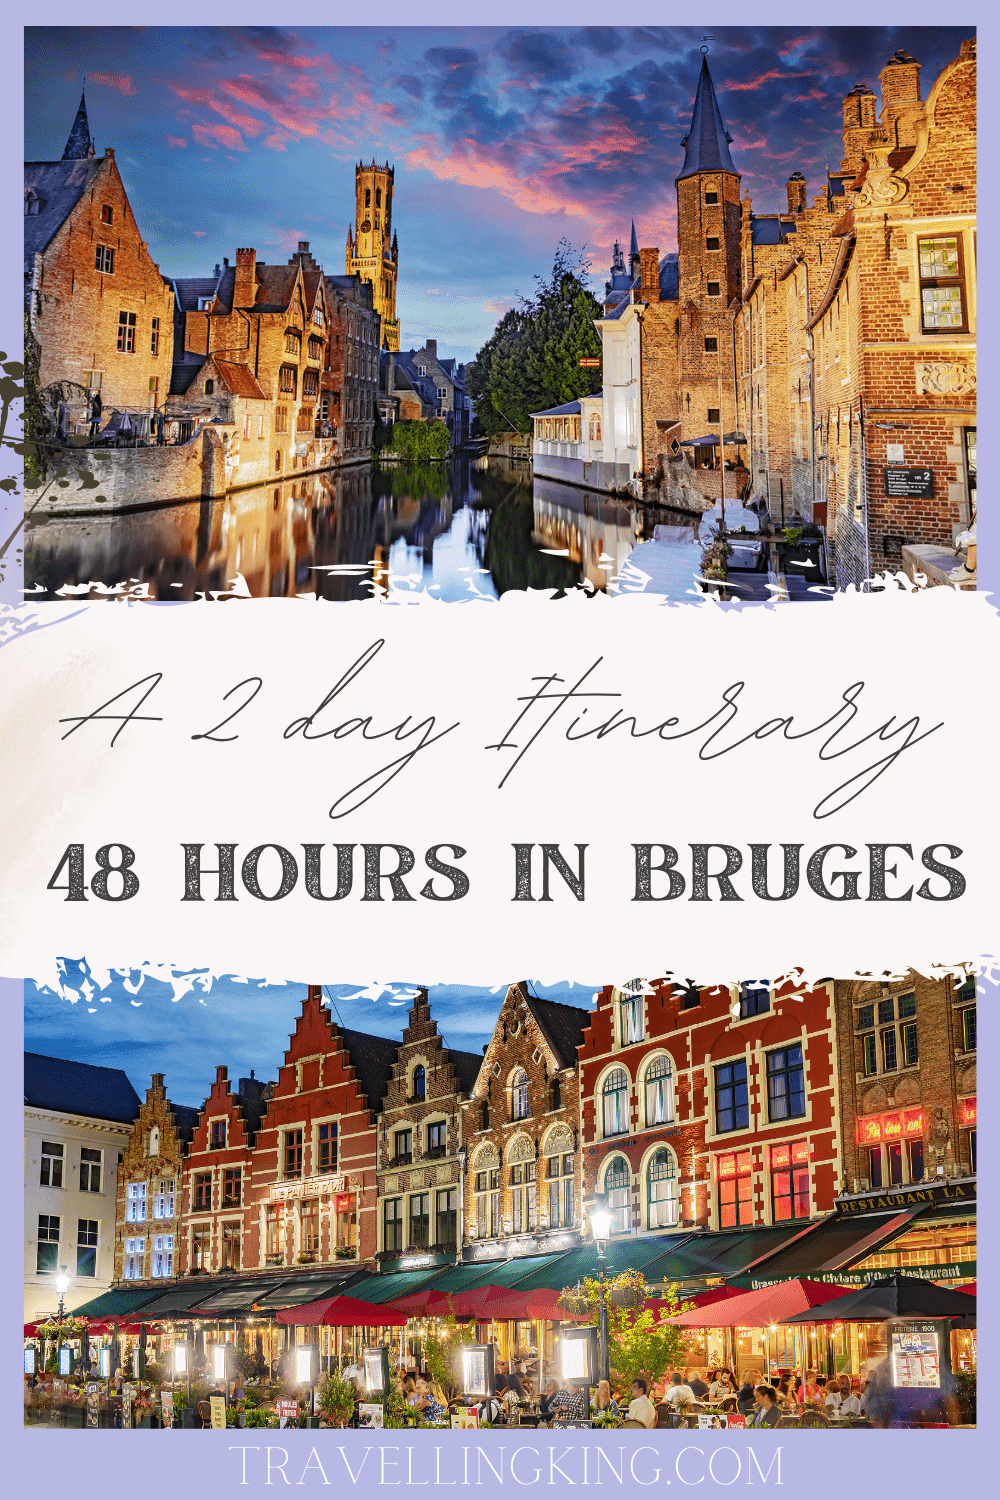 48 hours in Bruges - A 2 day Itinerary